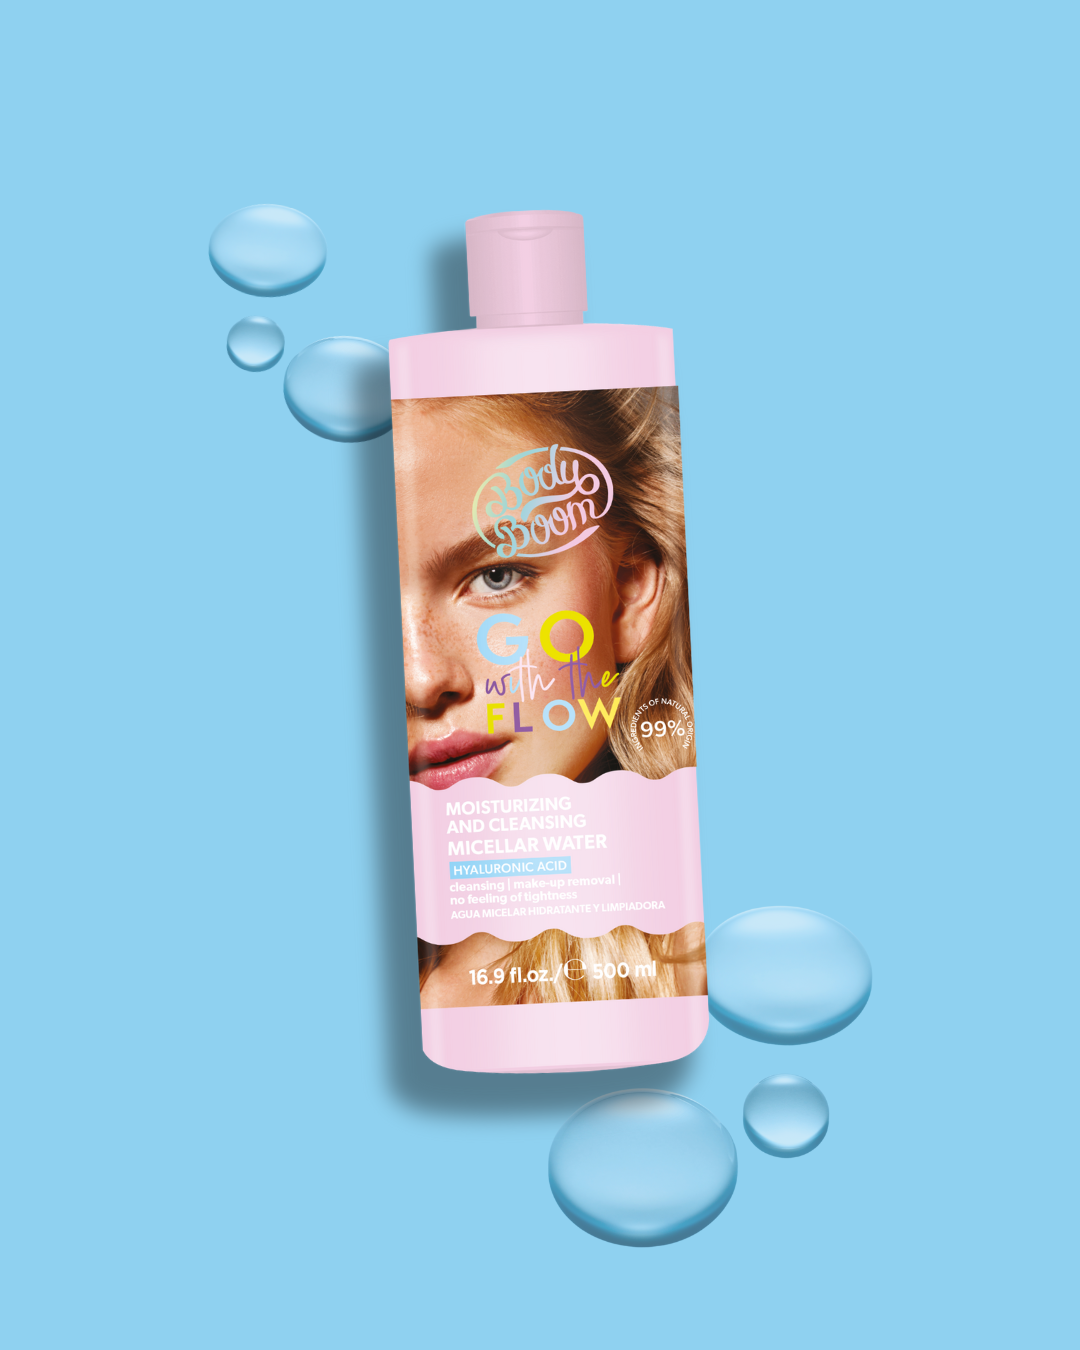 Go with the Flow Moisturizing and Cleansing Micellar Water